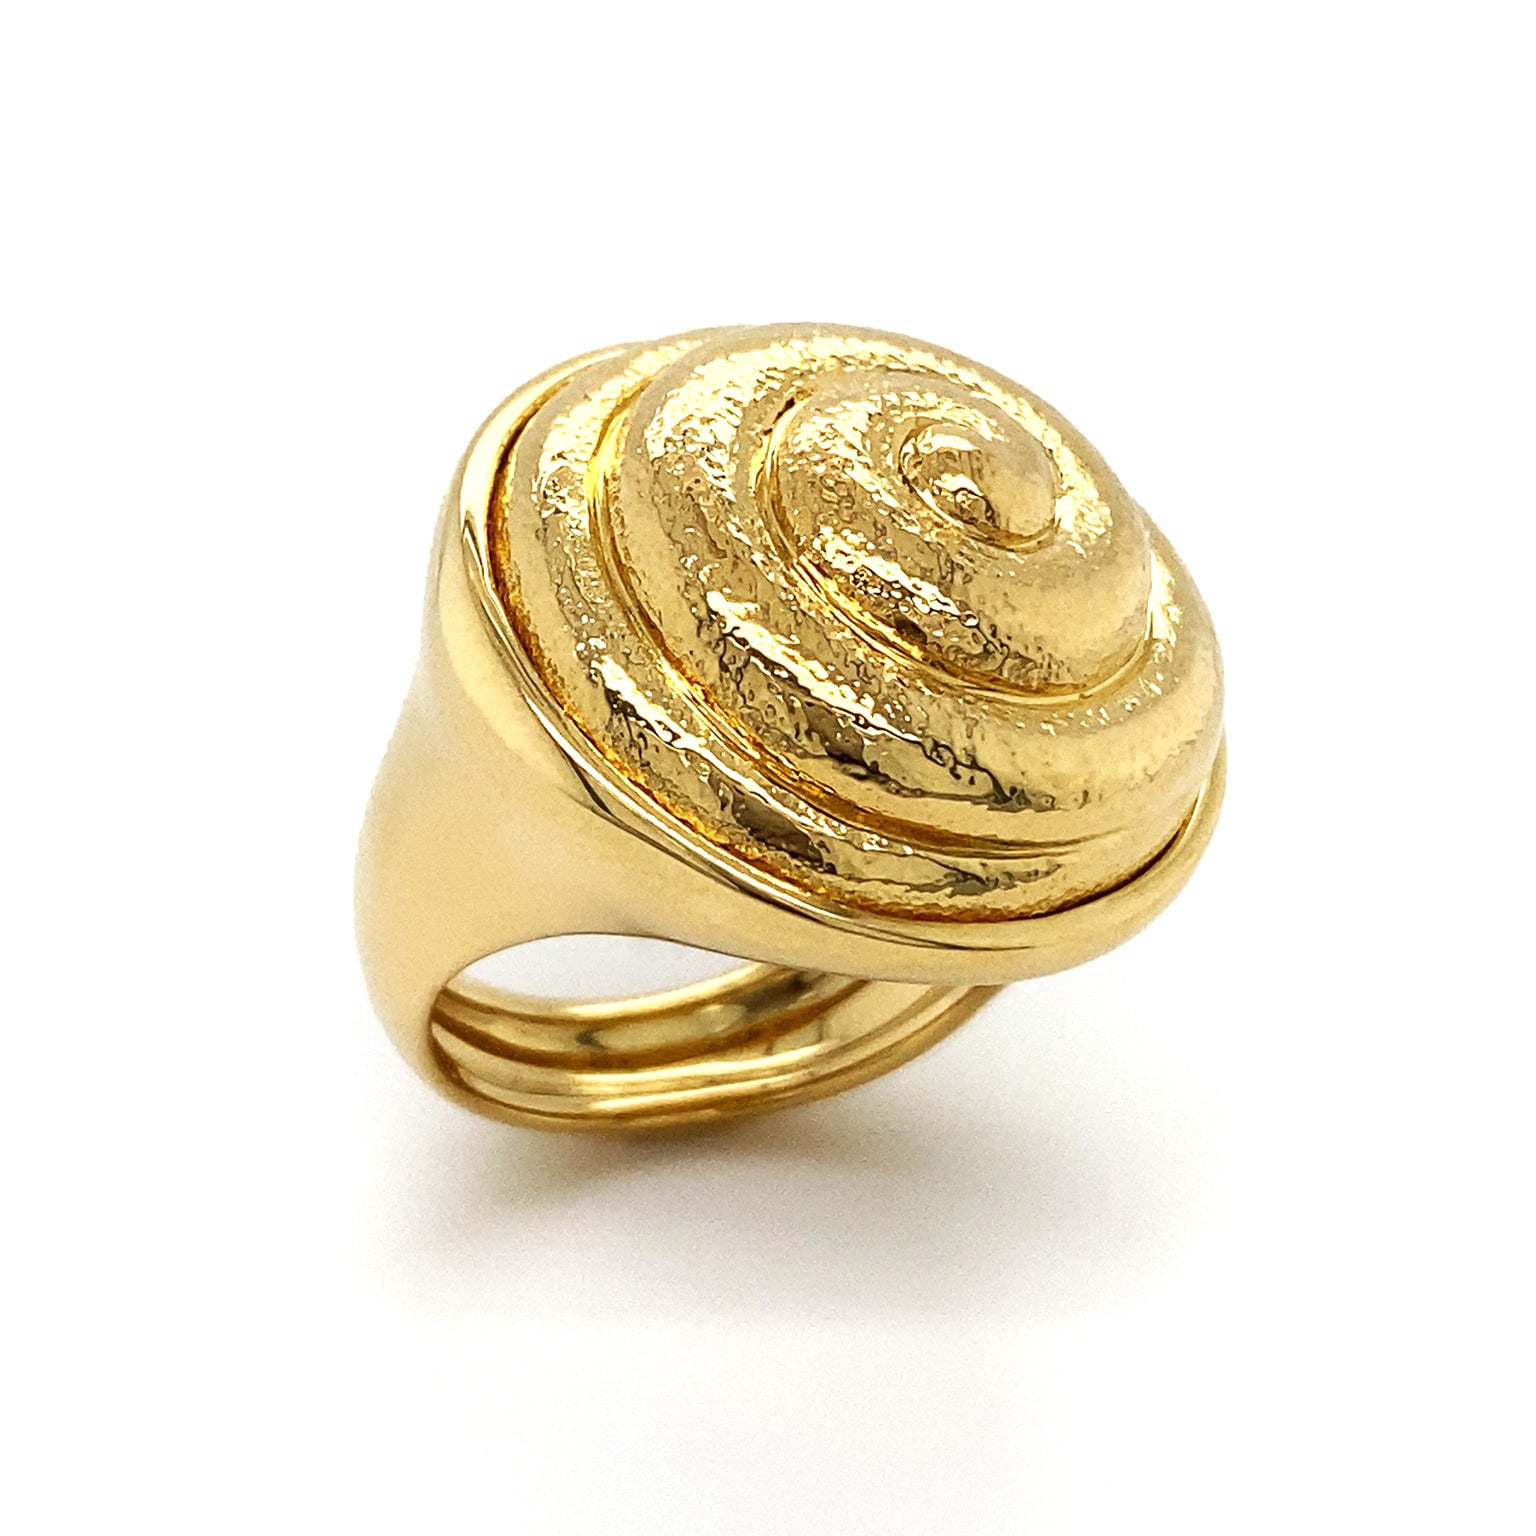 18k yellow gold sparkles with brilliancy in this ring. The bezel is a raised coil, inspired by the shell of a snail. The spiral is textured for a lustrous glow, while the groove itself is polished to match the band of the ring. Measurements for the